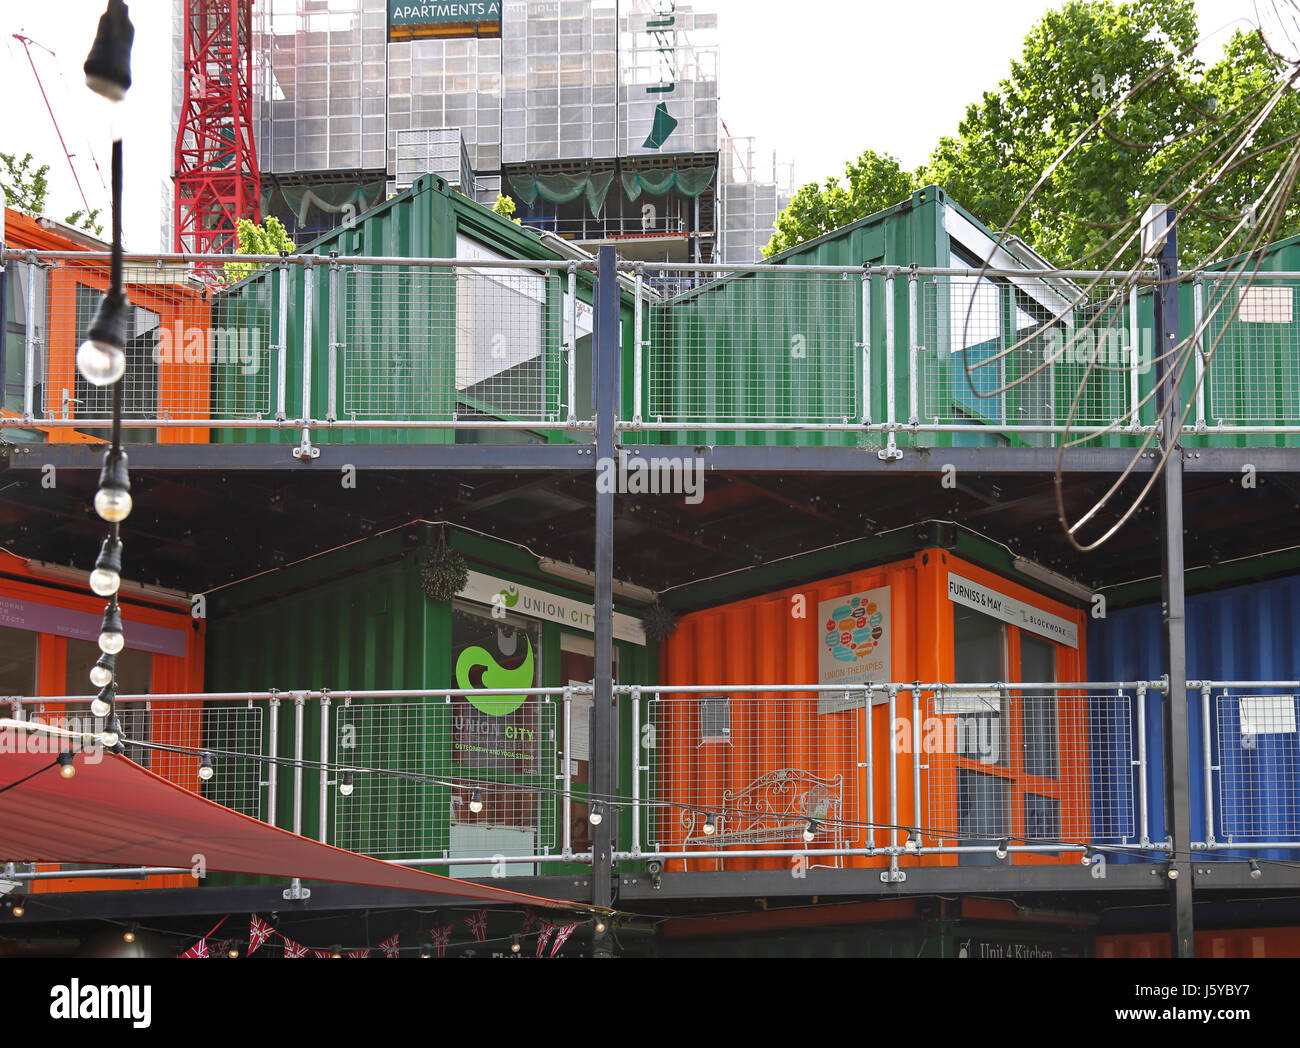 The Artworks Elephant, a development of shops offices and cafes in south London constructed from shipping containers. Elephant and Castle. Stock Photo